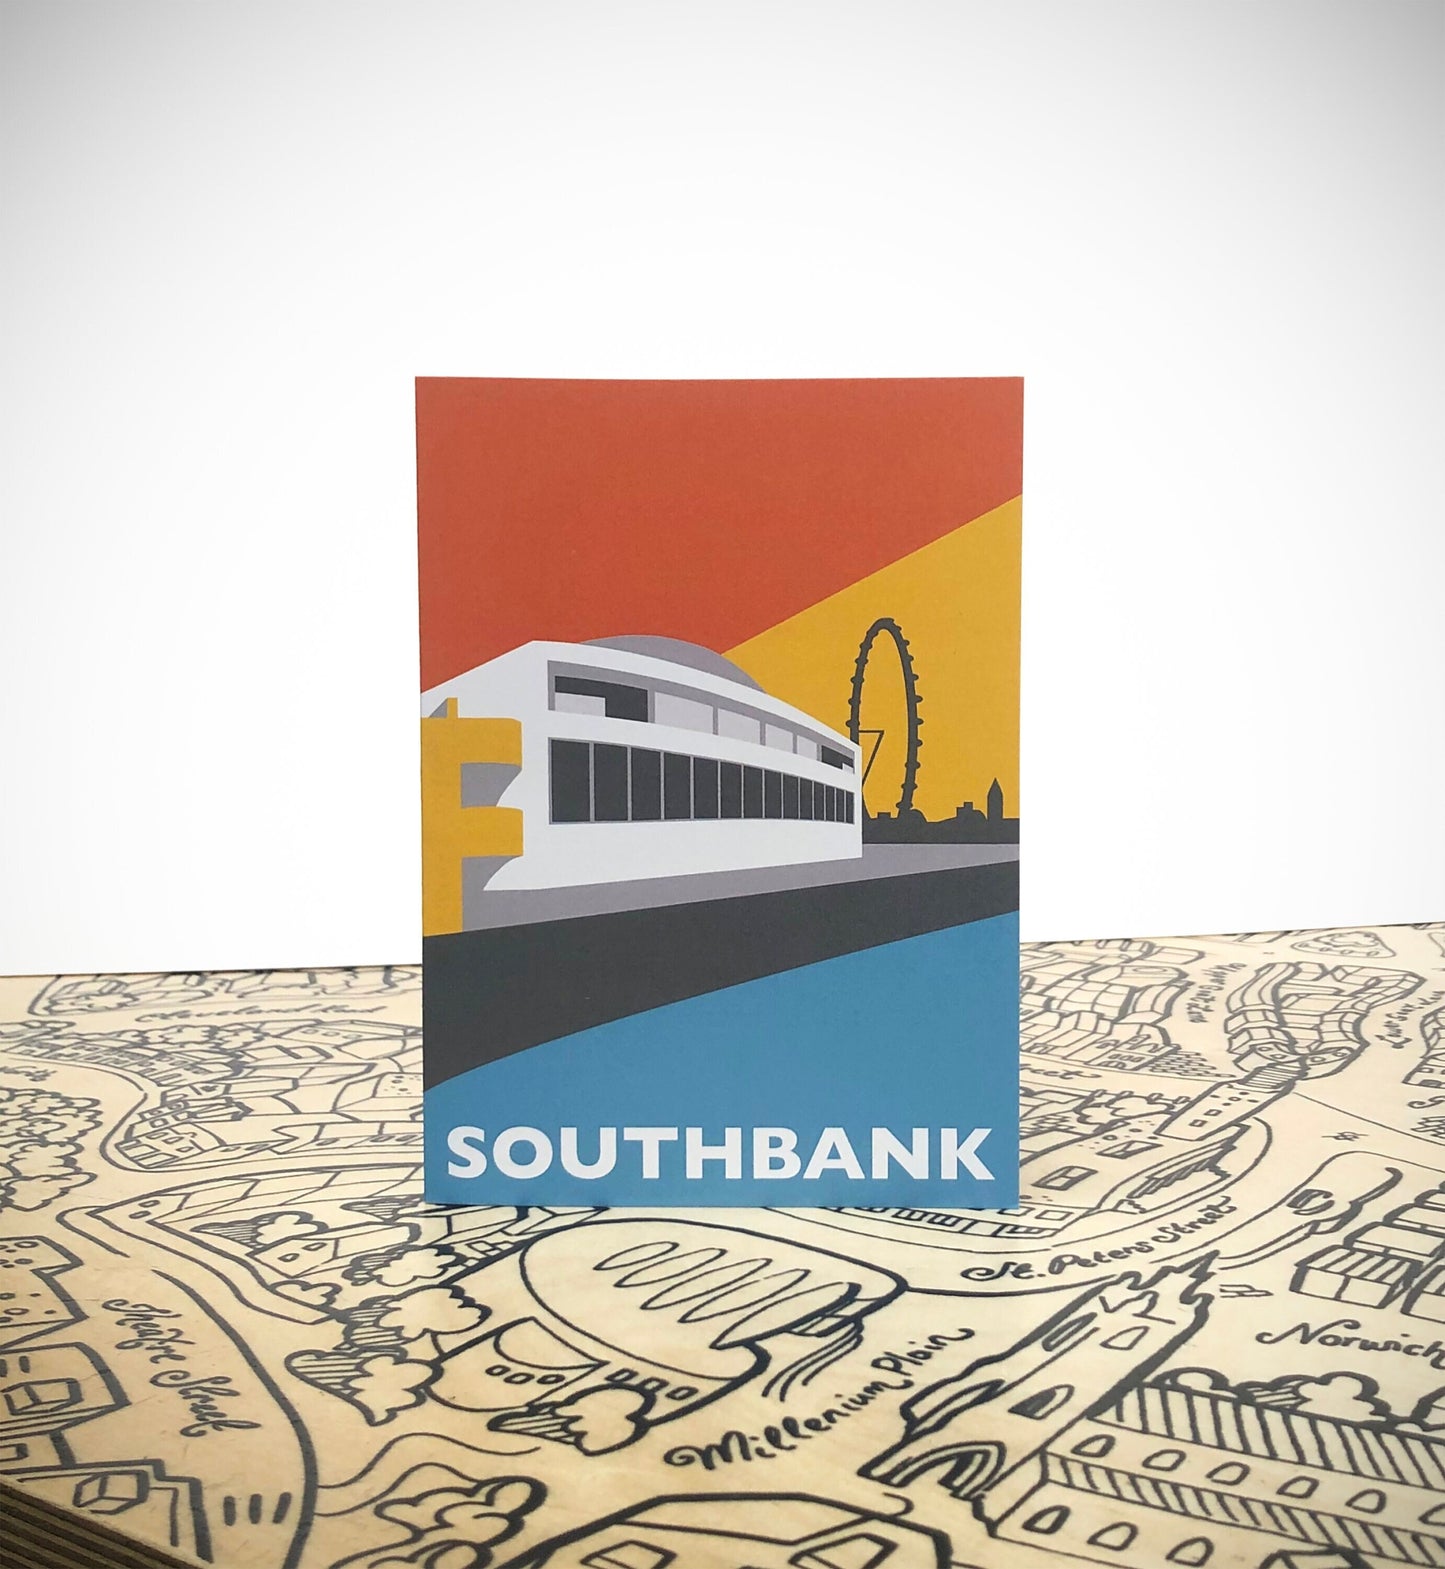 SOUTHBANK - Royal Festival Hall - London - Brutalism / Brutalist - Travel Poster Style Greetings Card by Rebecca Pymar